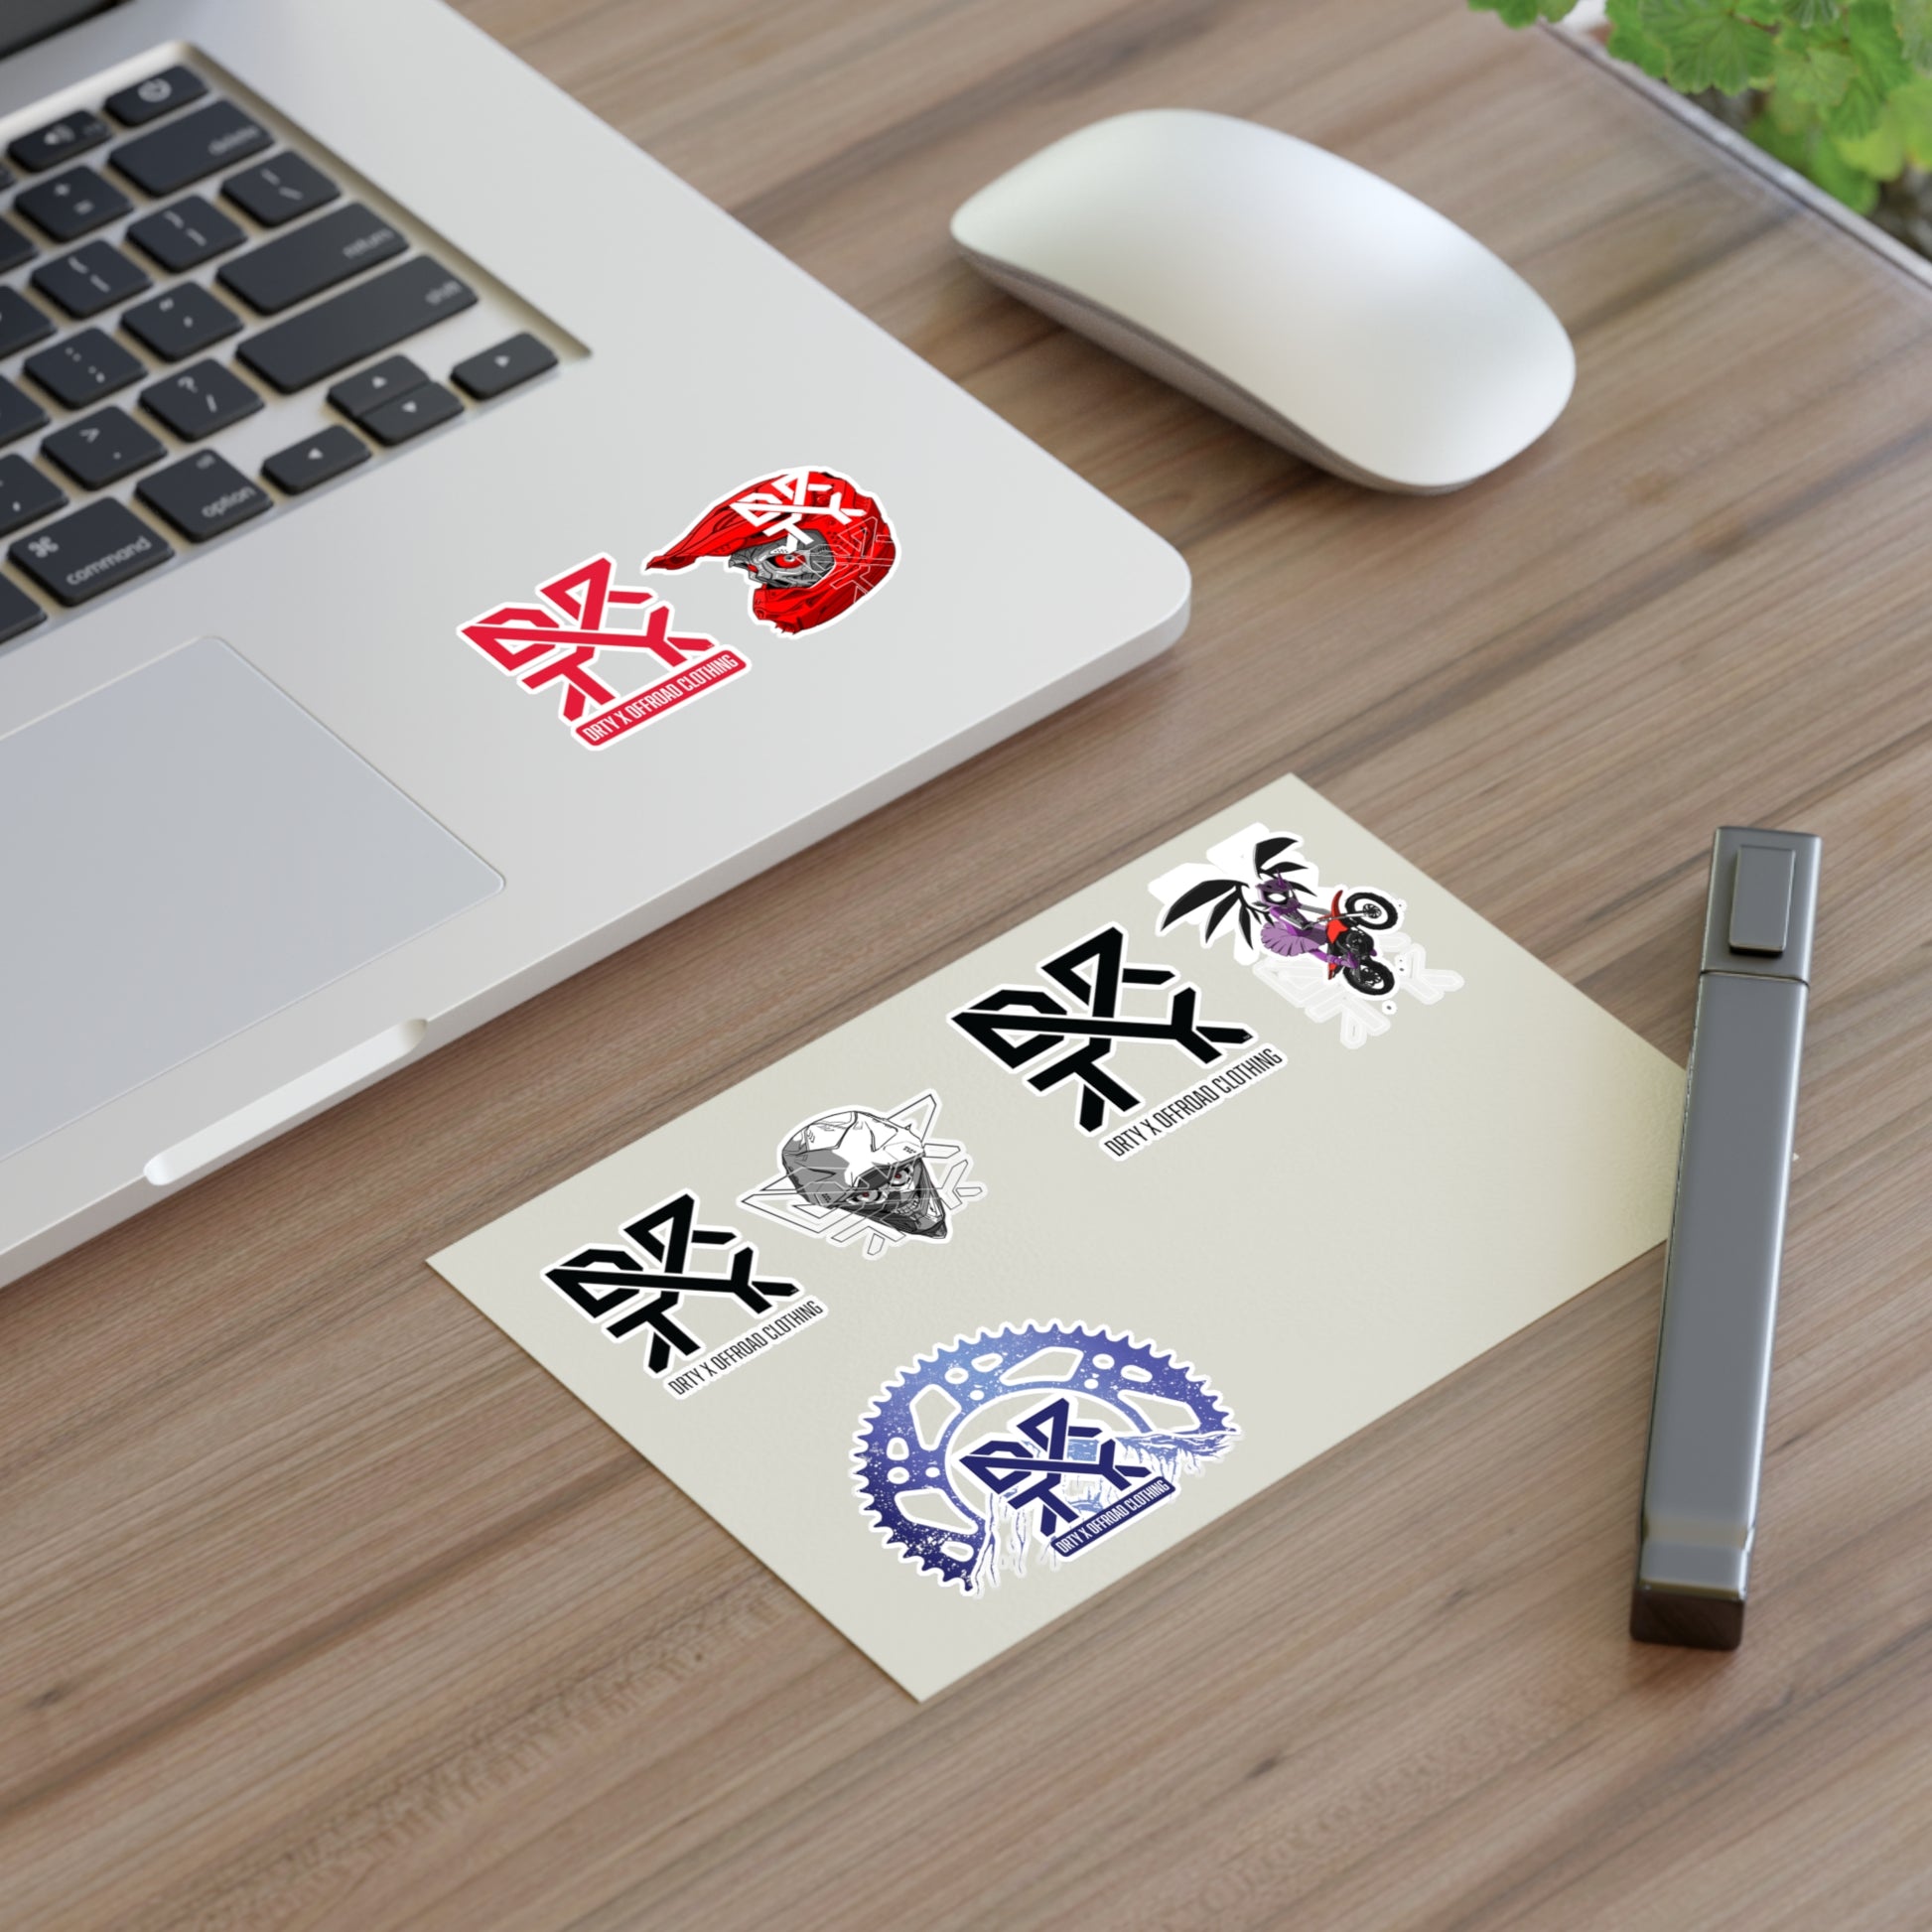 This image shows a small DRTY X logo and artwork sticker on a laptop background and sticker sheet on a table